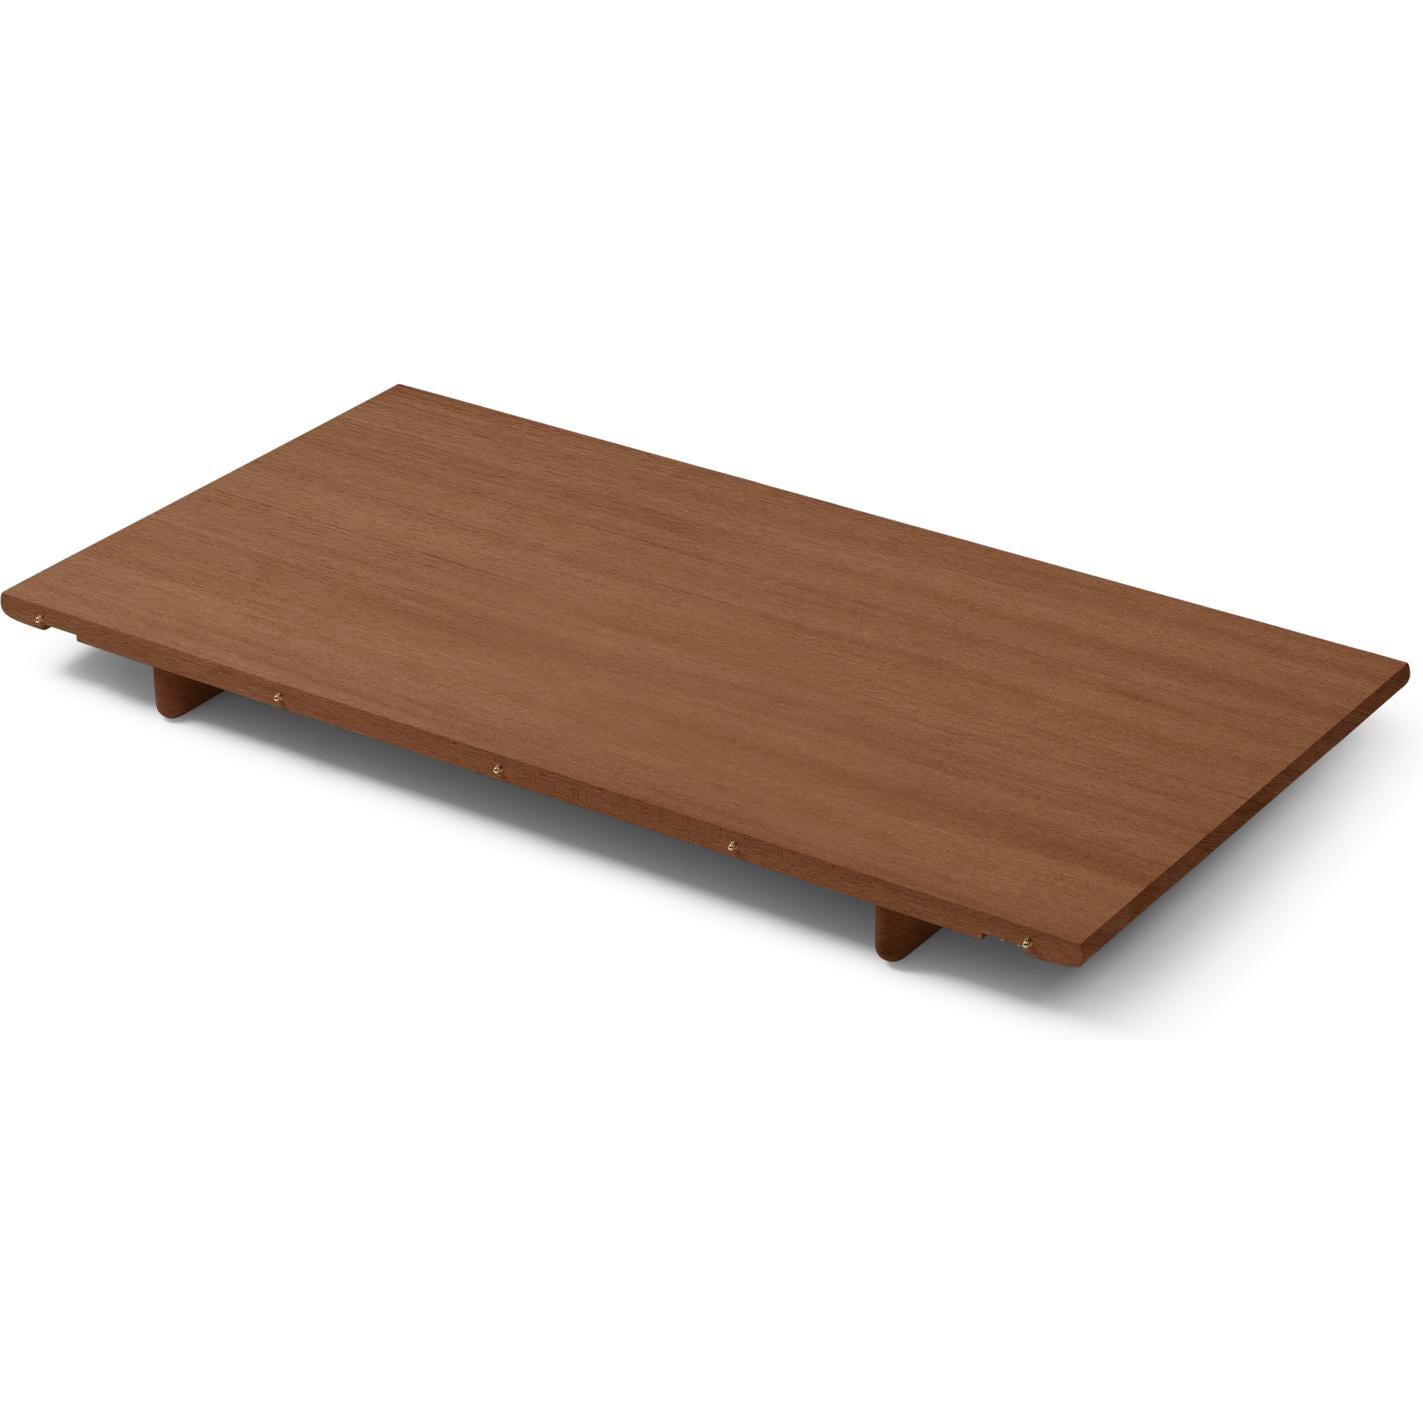 Carl Hansen Sat Plate For Ch337 Table, Mahogany Oiled